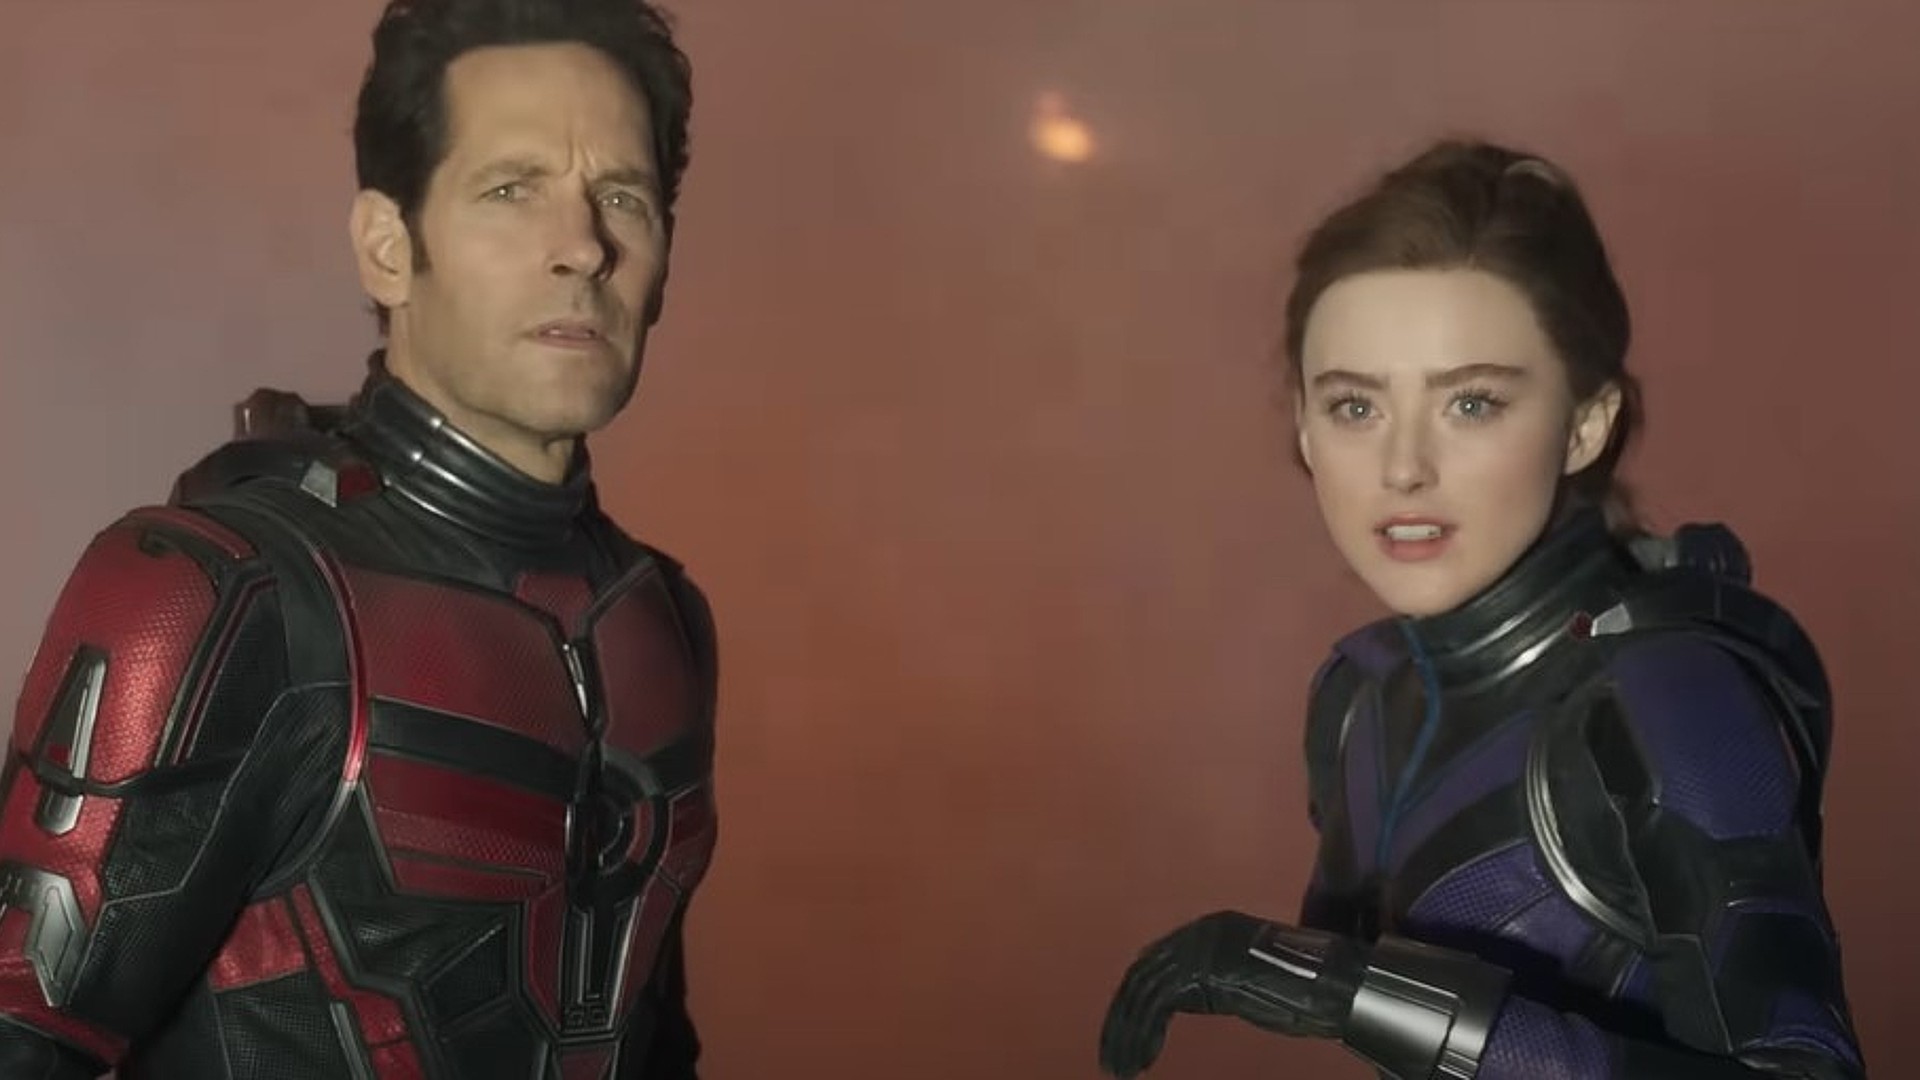 Ant-Man and the Wasp: Quantumania Disney Plus release date revealed